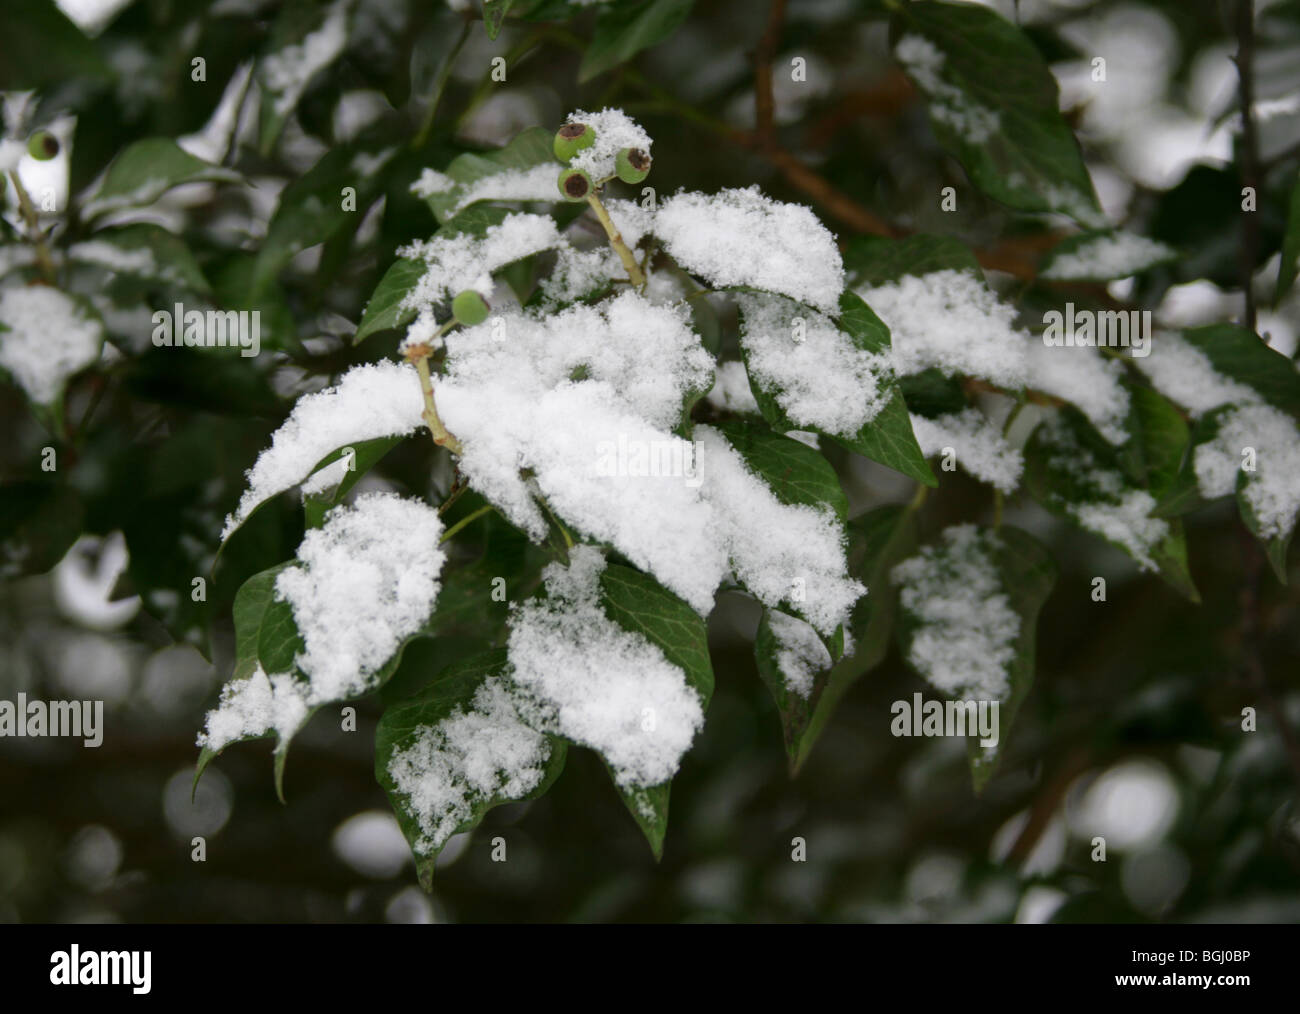 Snow Covered Ivy, Hedera helix, Araliaceae Stock Photo